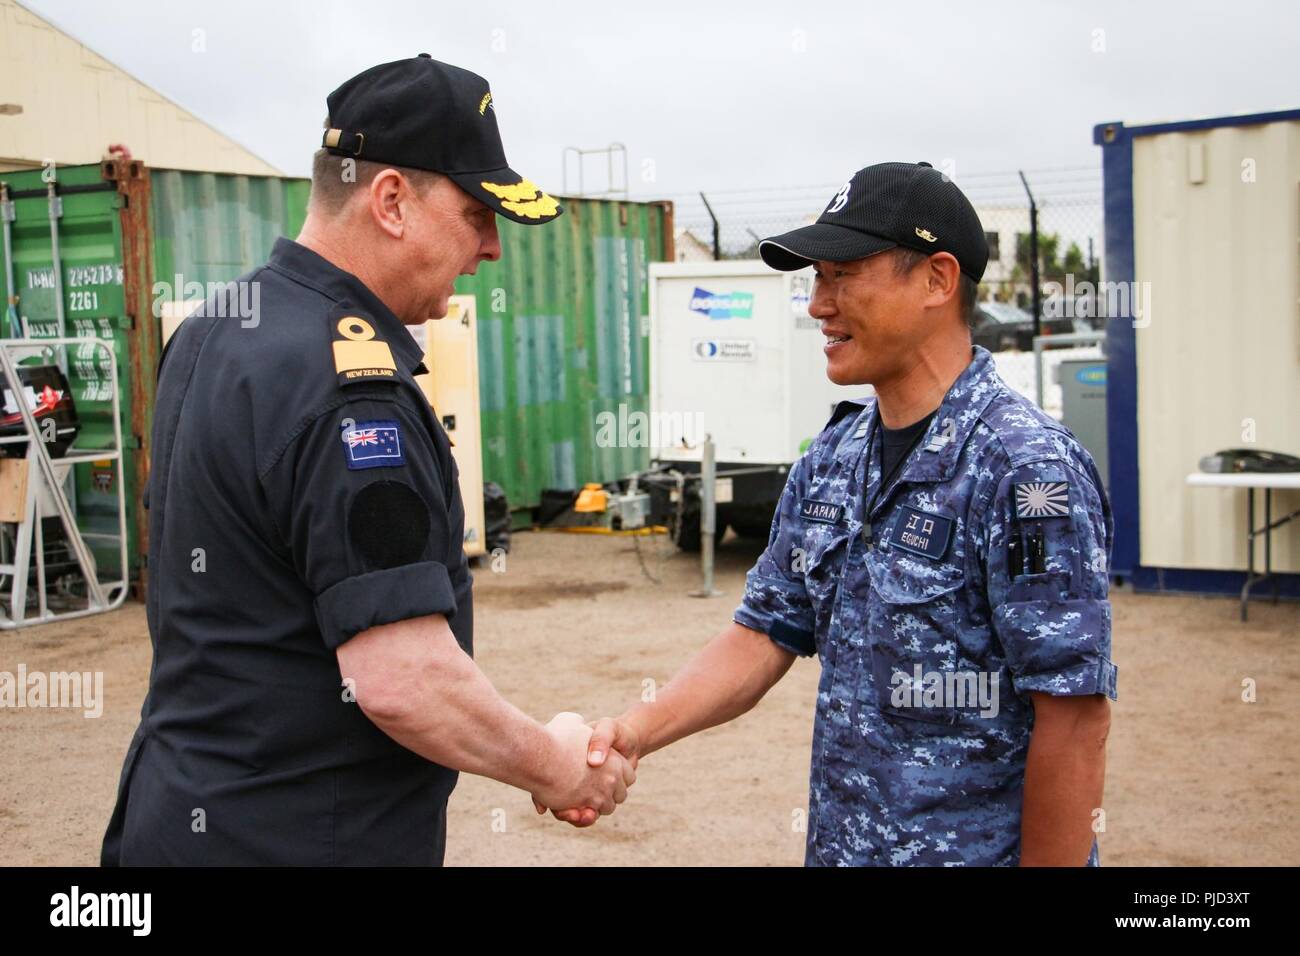 NAVAL BASE POINT LOMA, Calif.  (July 17, 2018) - Royal New Zealand Navy (RNZN) Commodore Tony Millar, maritime component commander and representative of the Chief of Navy (New Zealand), shakes hands with an officer from the Japan Maritime Self Defense Force serving with Mine Warfare Task Force during a visit to Naval Base Point Loma July 17. Millar visited the undersea mine countermeasures task group led by the RNZN during their participation in the Rim of the Pacific (RIMPAC) exercise  in the Southern California area of operations. Twenty-five nations, 46 ships, five submarines, about 200 air Stock Photo